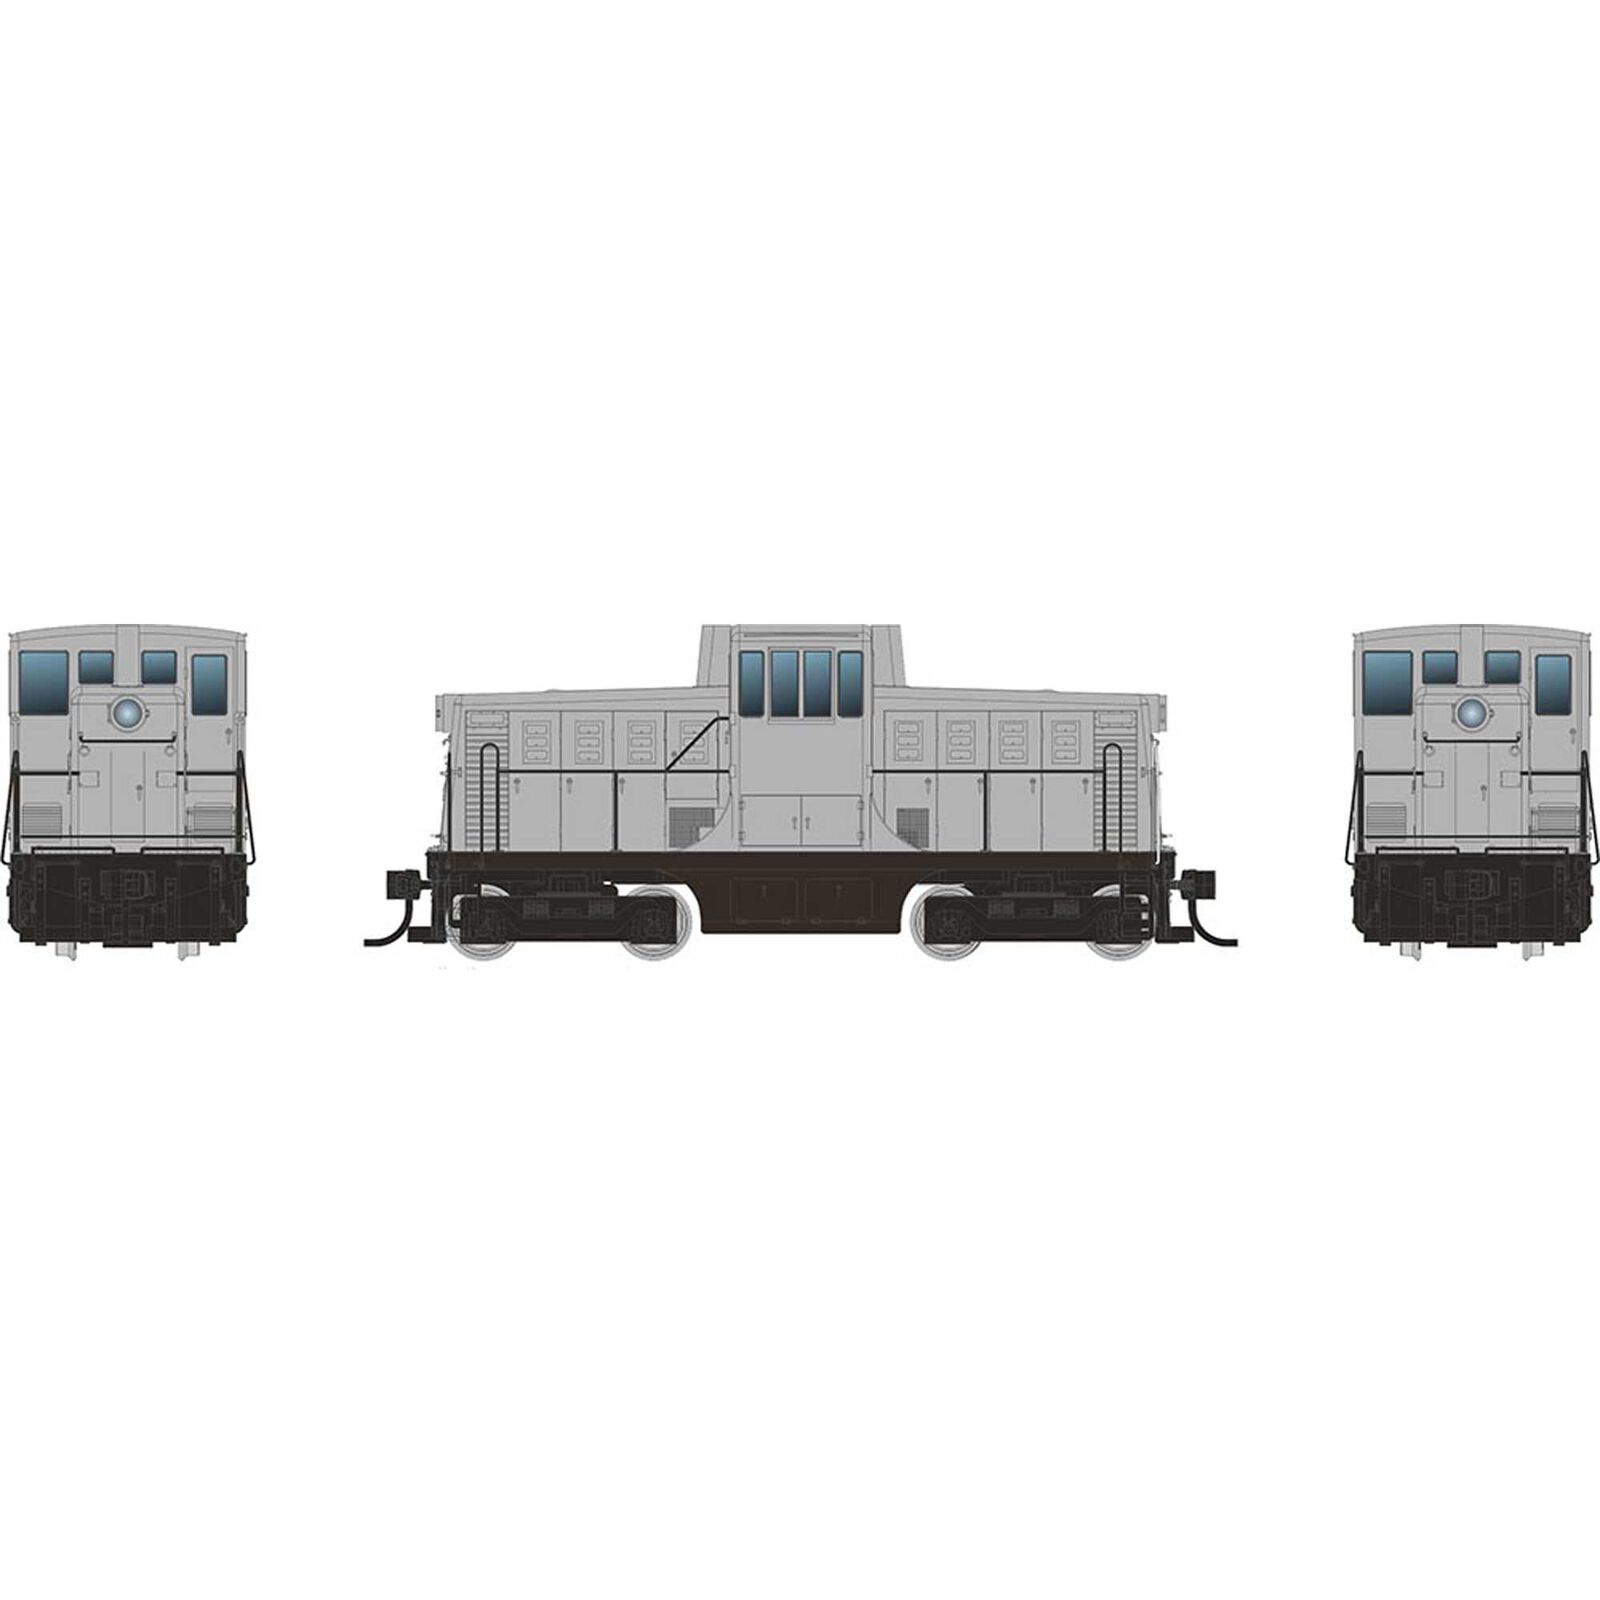 HO GE 44 Tonner Switcher Locomotive with DCC & Sound, Undecorated Phase Ic Body